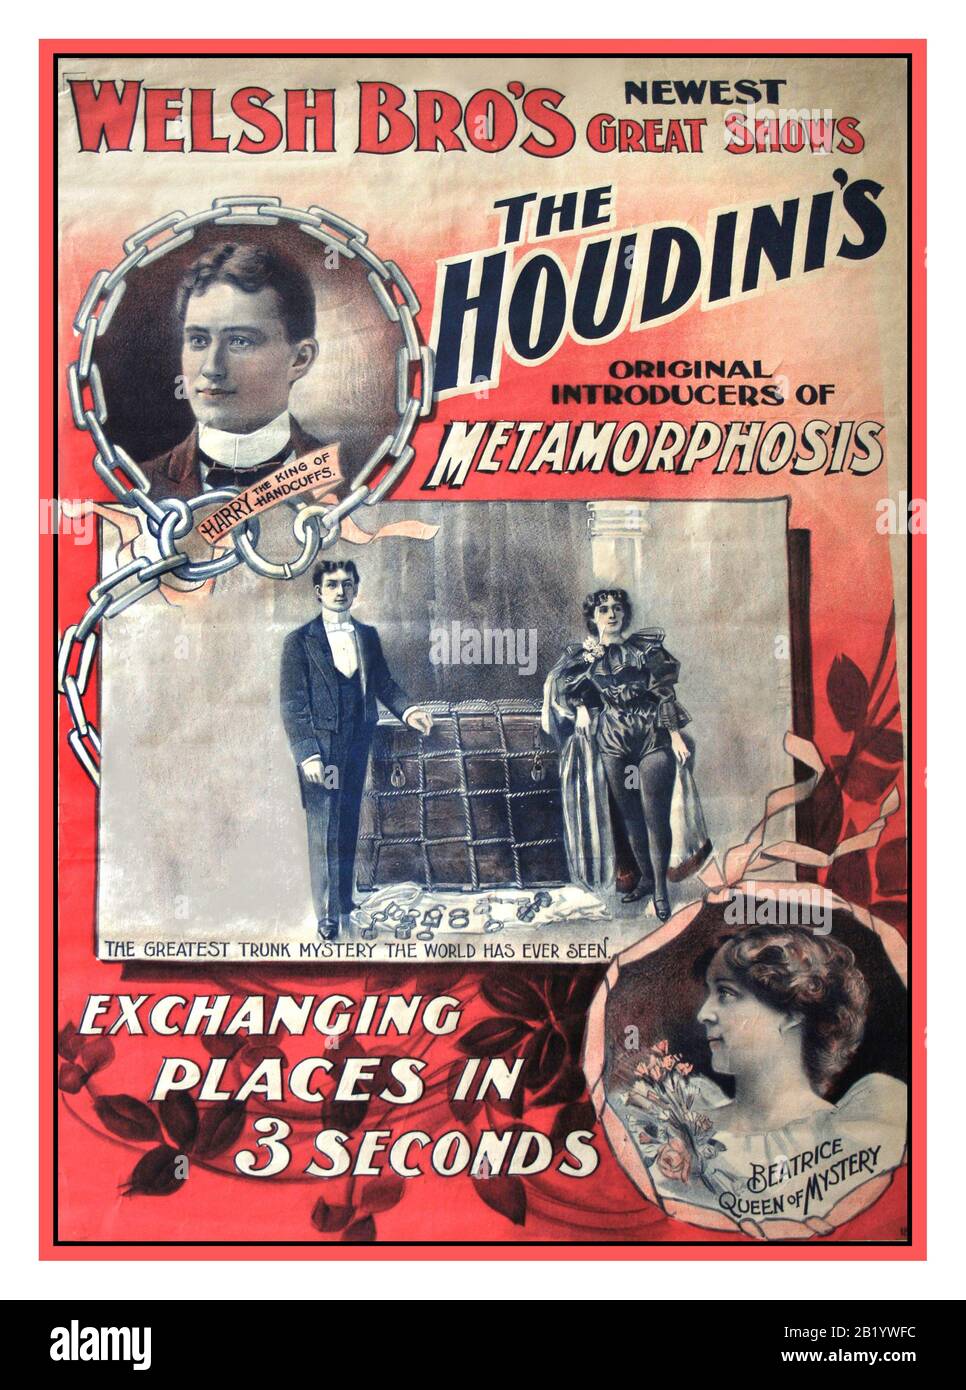 Vintage 1895 The Houdini’s Entertainment poster by Welsh Brothers Newest Great Shows.... ‘Metamorphosis’ Exchanging places in 3 seconds ‘ Beatrice Queen of mystery The greatest trunk mystery the world has ever seen’  Metamorphosis (The Substitution Trunk) When Houdini and his wife Bessie went on in the road in 1894, they featured an illusion called 'Metamorphosis.' While other magicians performed this illusion, it was the use of both a man and a woman that made it so successful. It was this trick that gained the Houdini's their first big tour with the Welsh Brothers Circus in 1895. Stock Photo